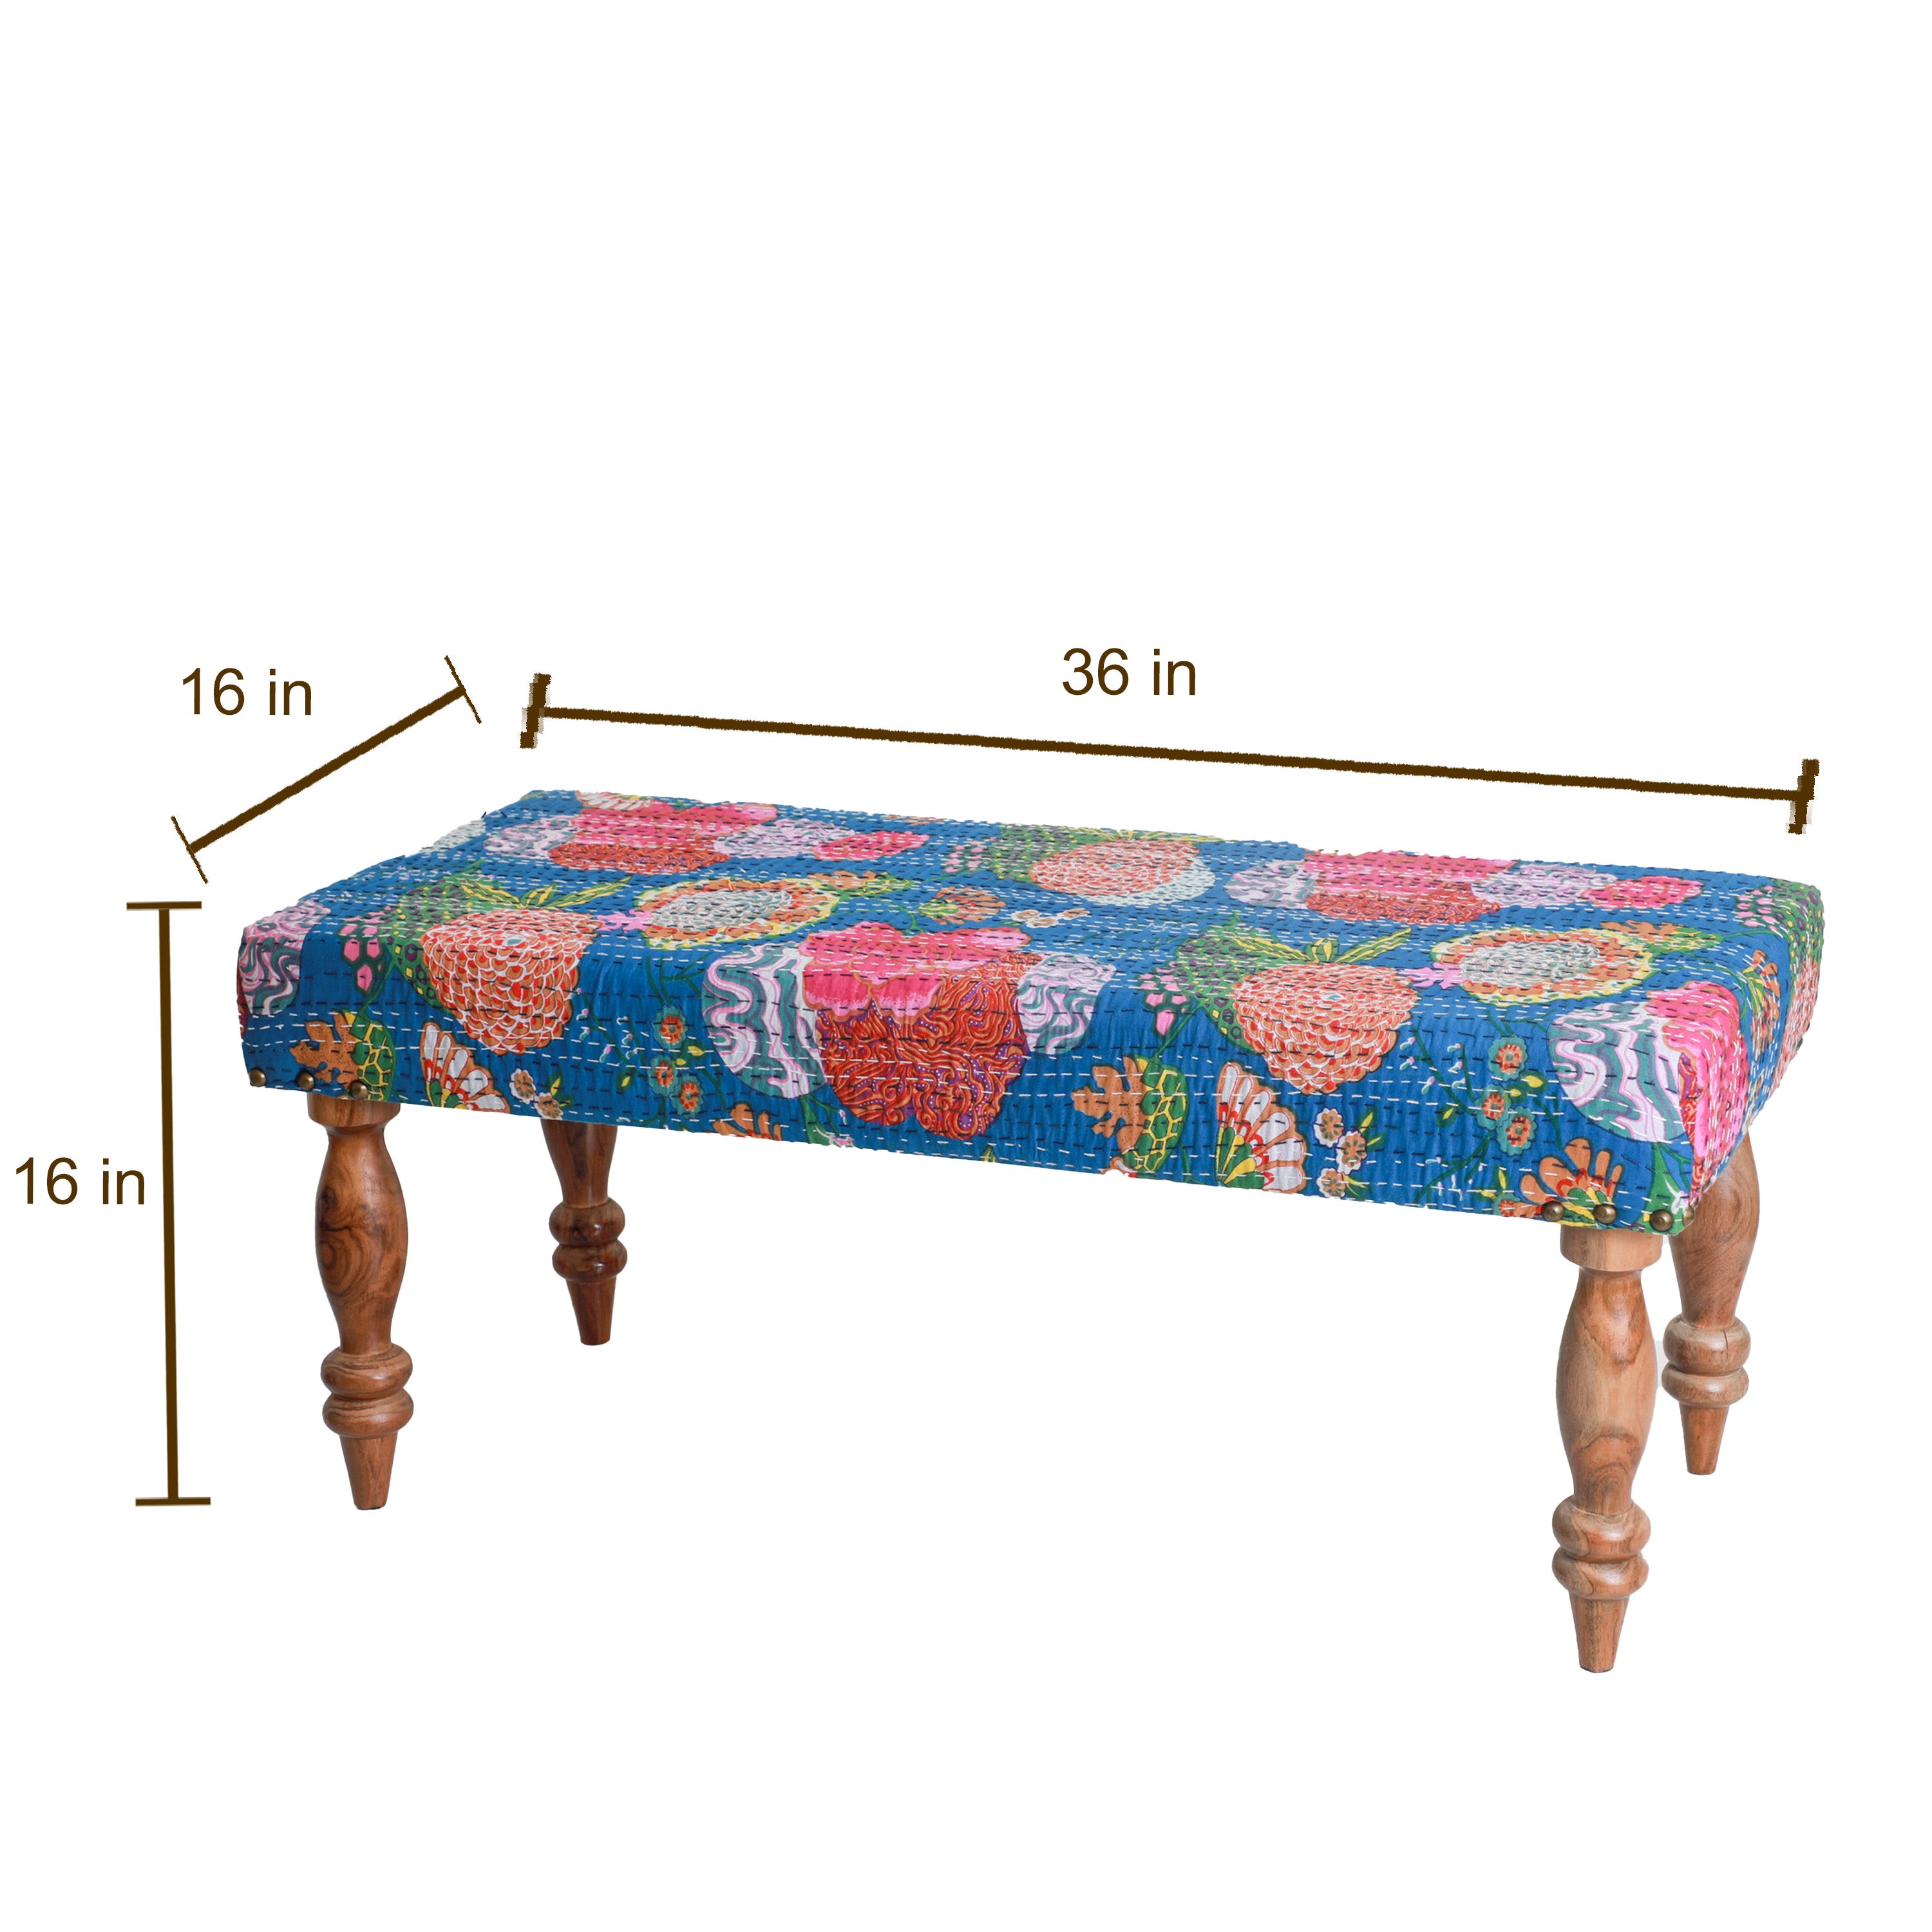 Wooden Seating Bench for Home/Office Decor in the USA